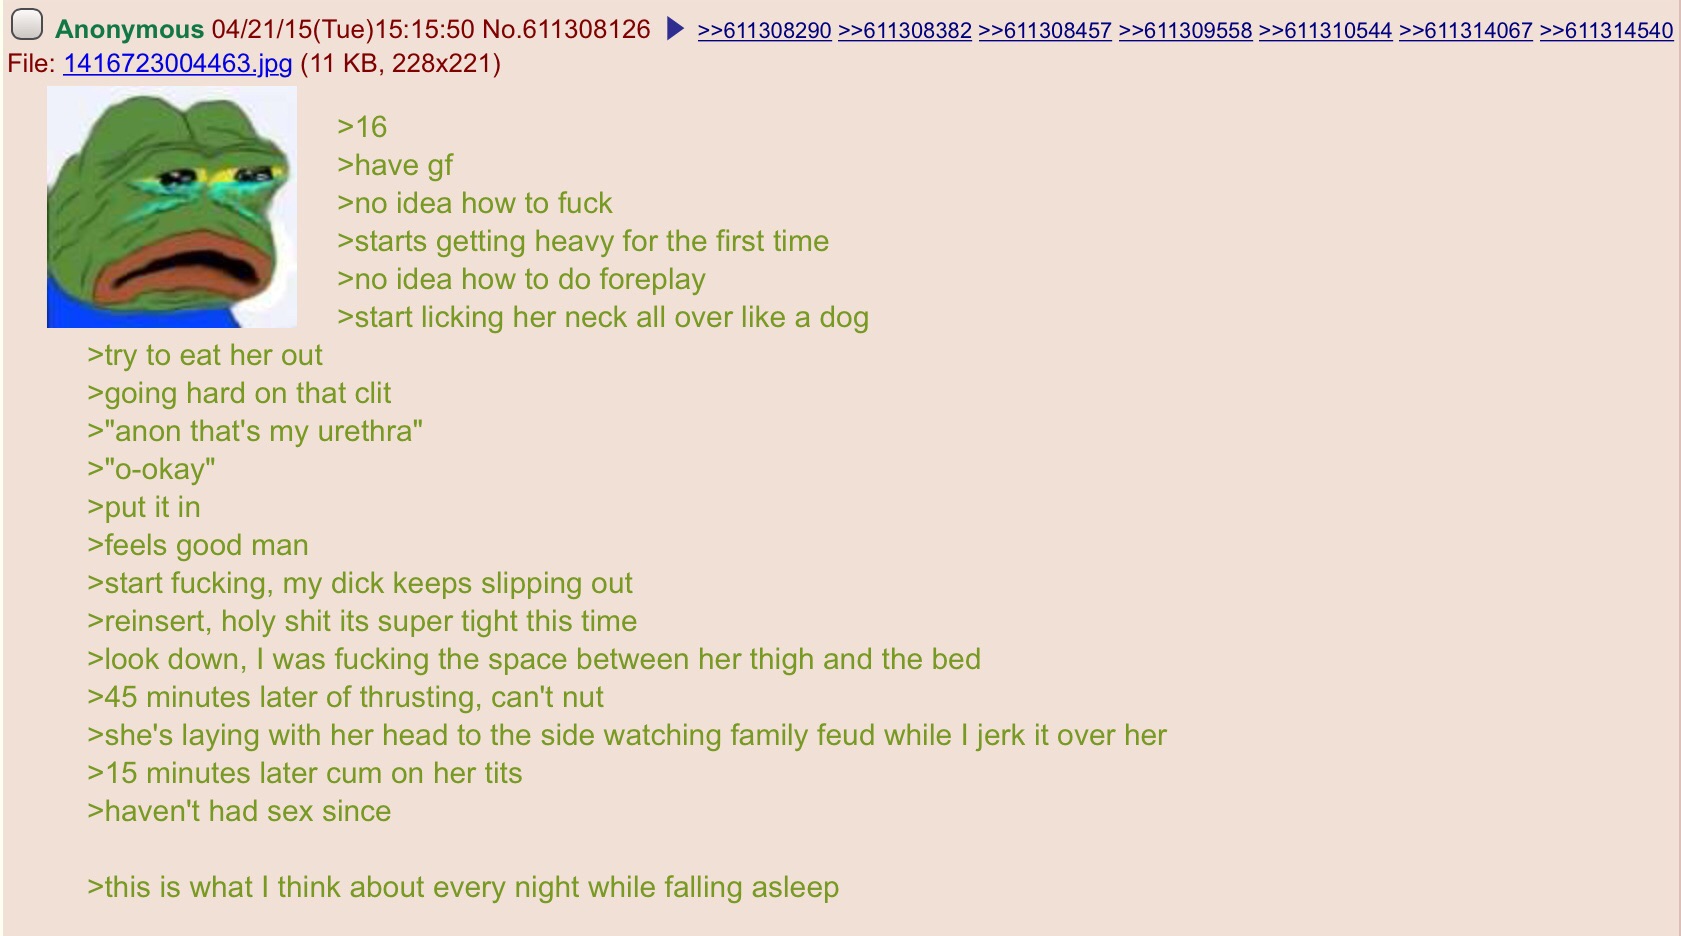 Anon loses his V card